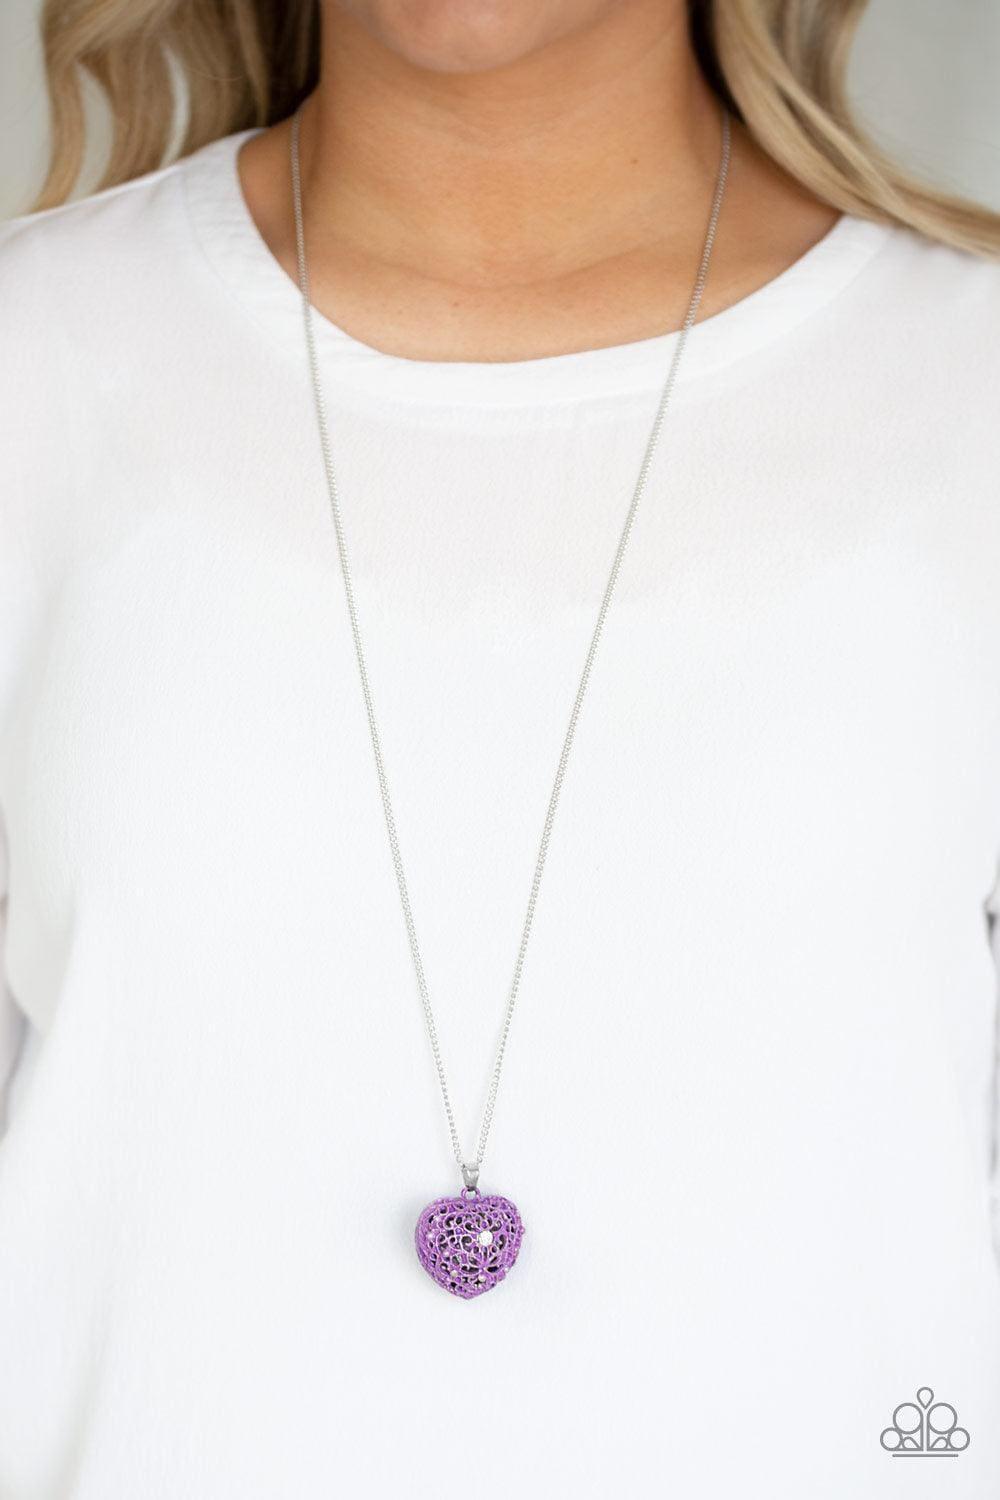 Paparazzi Accessories - Love Is All Around - Purple Necklace - Bling by JessieK